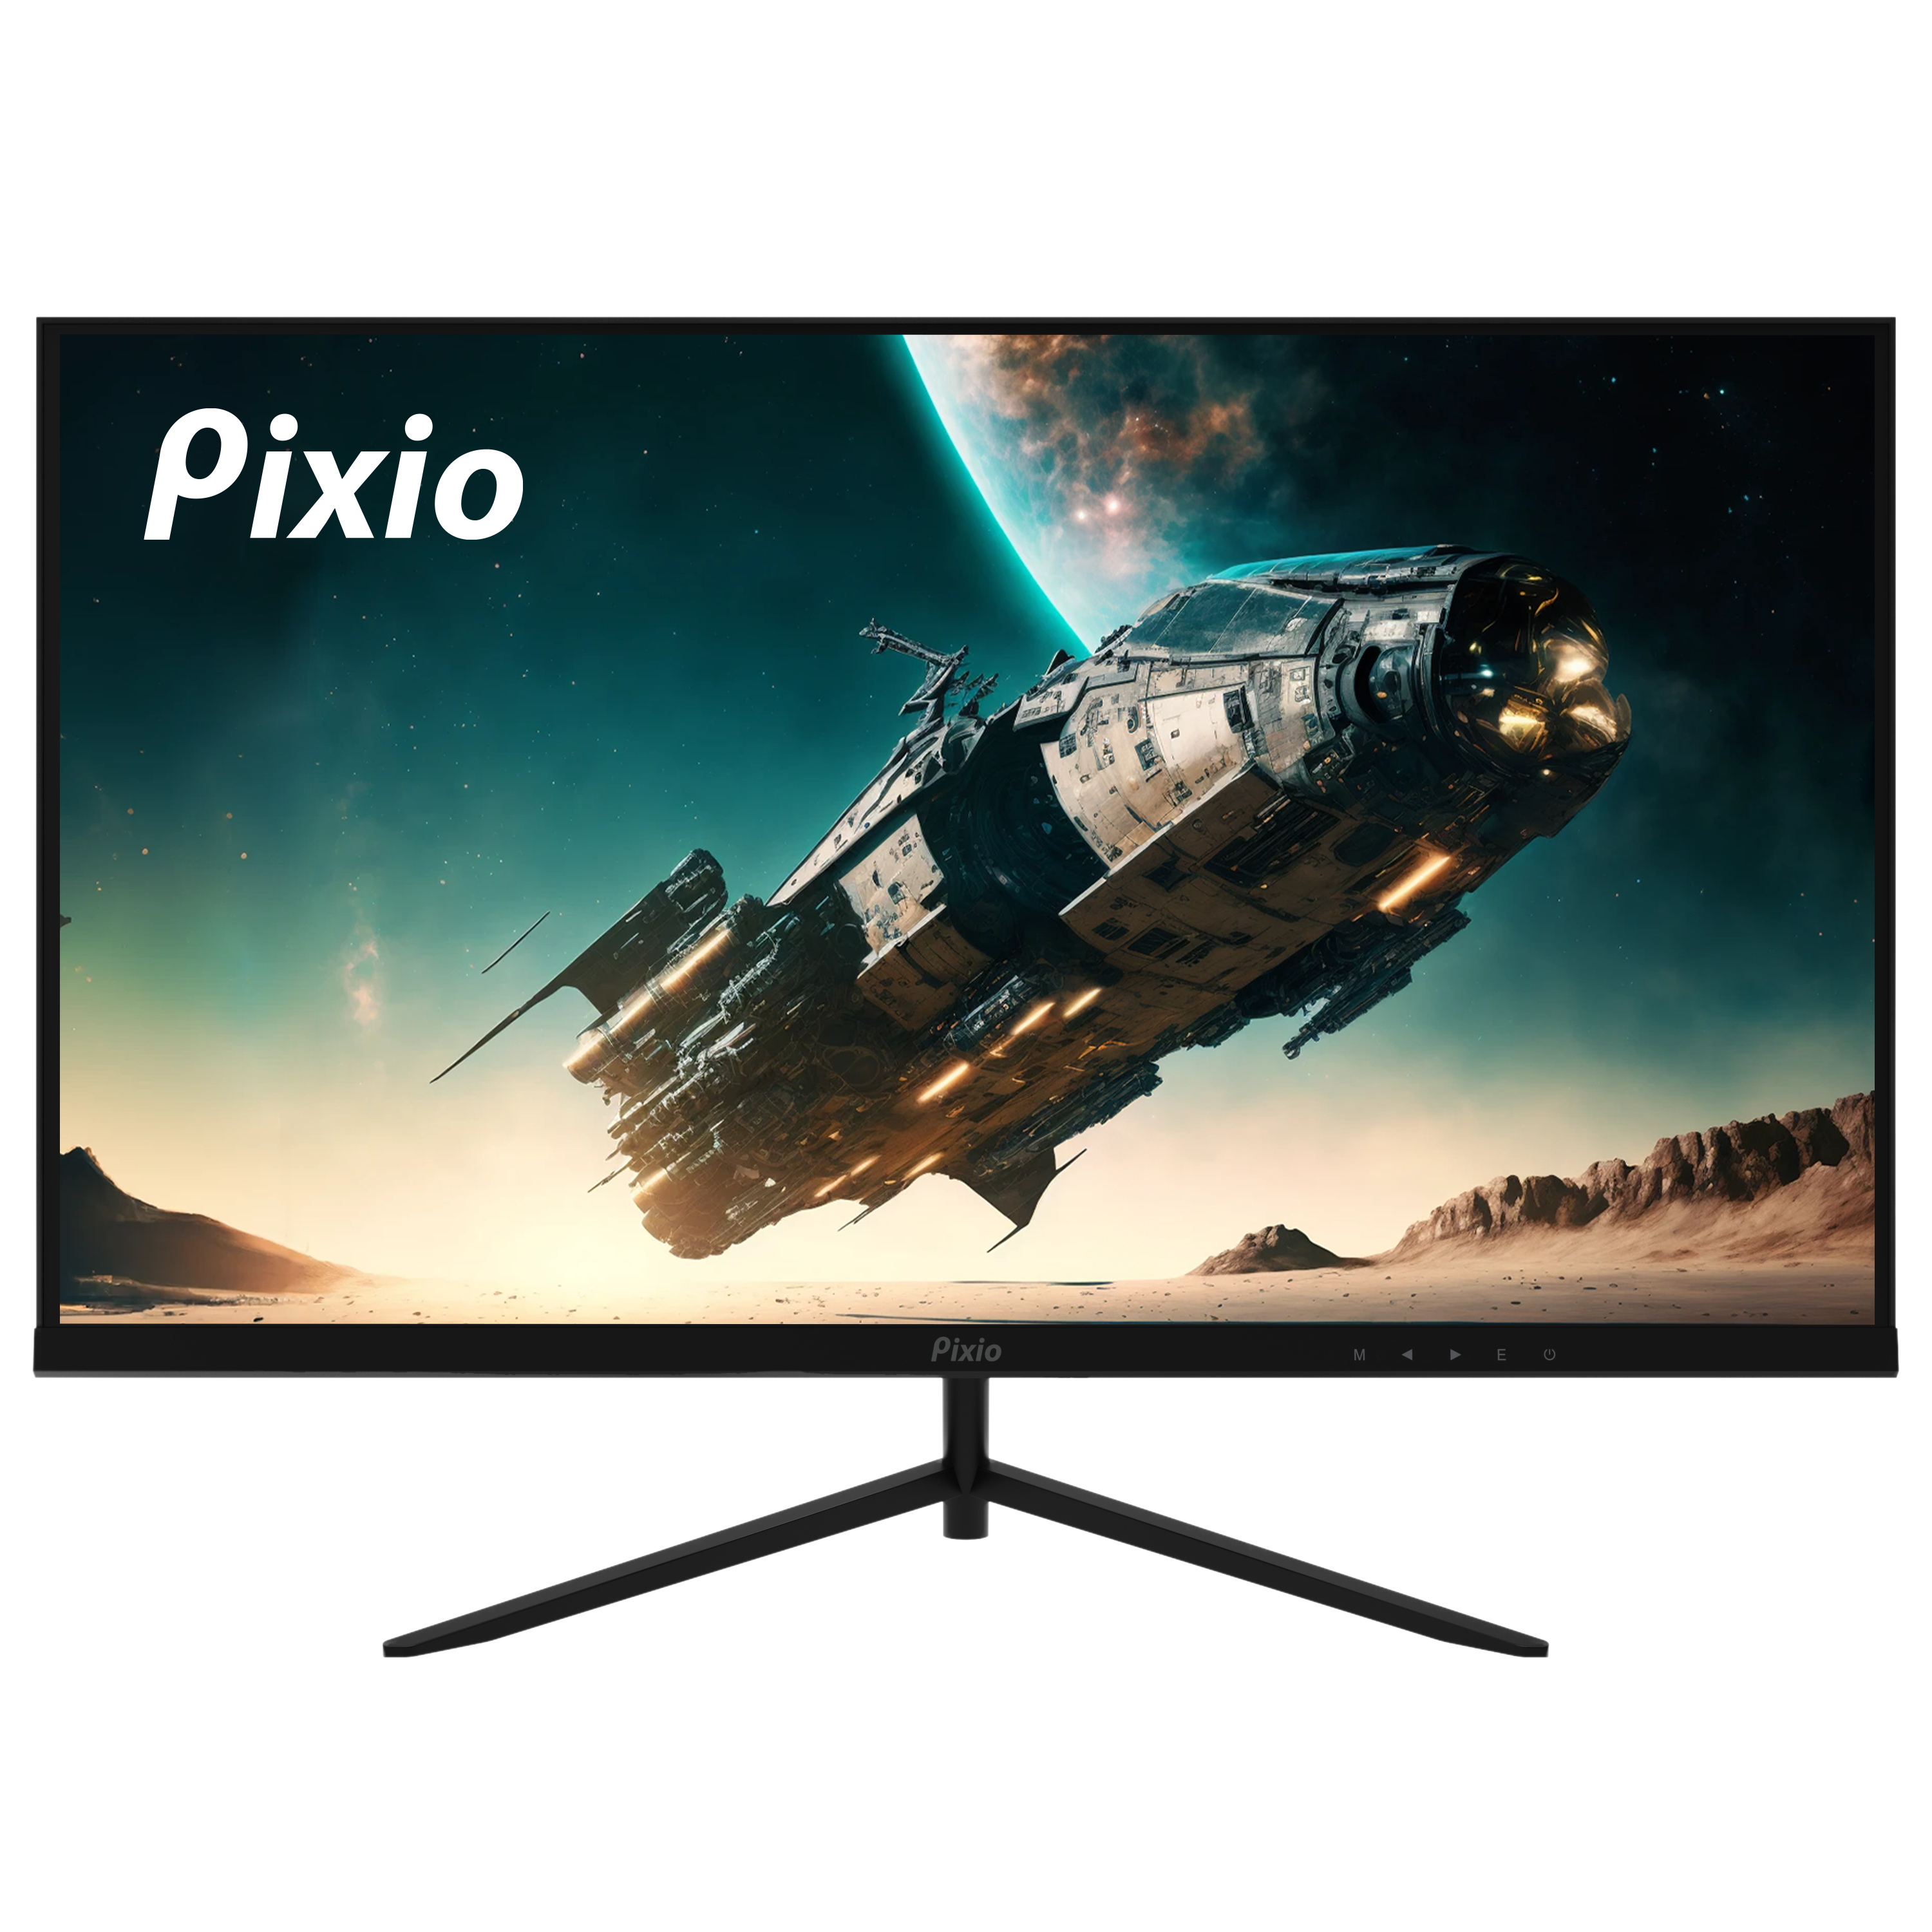 Pixio PX222 Productivity Gaming Monitor - Certified Refurbished